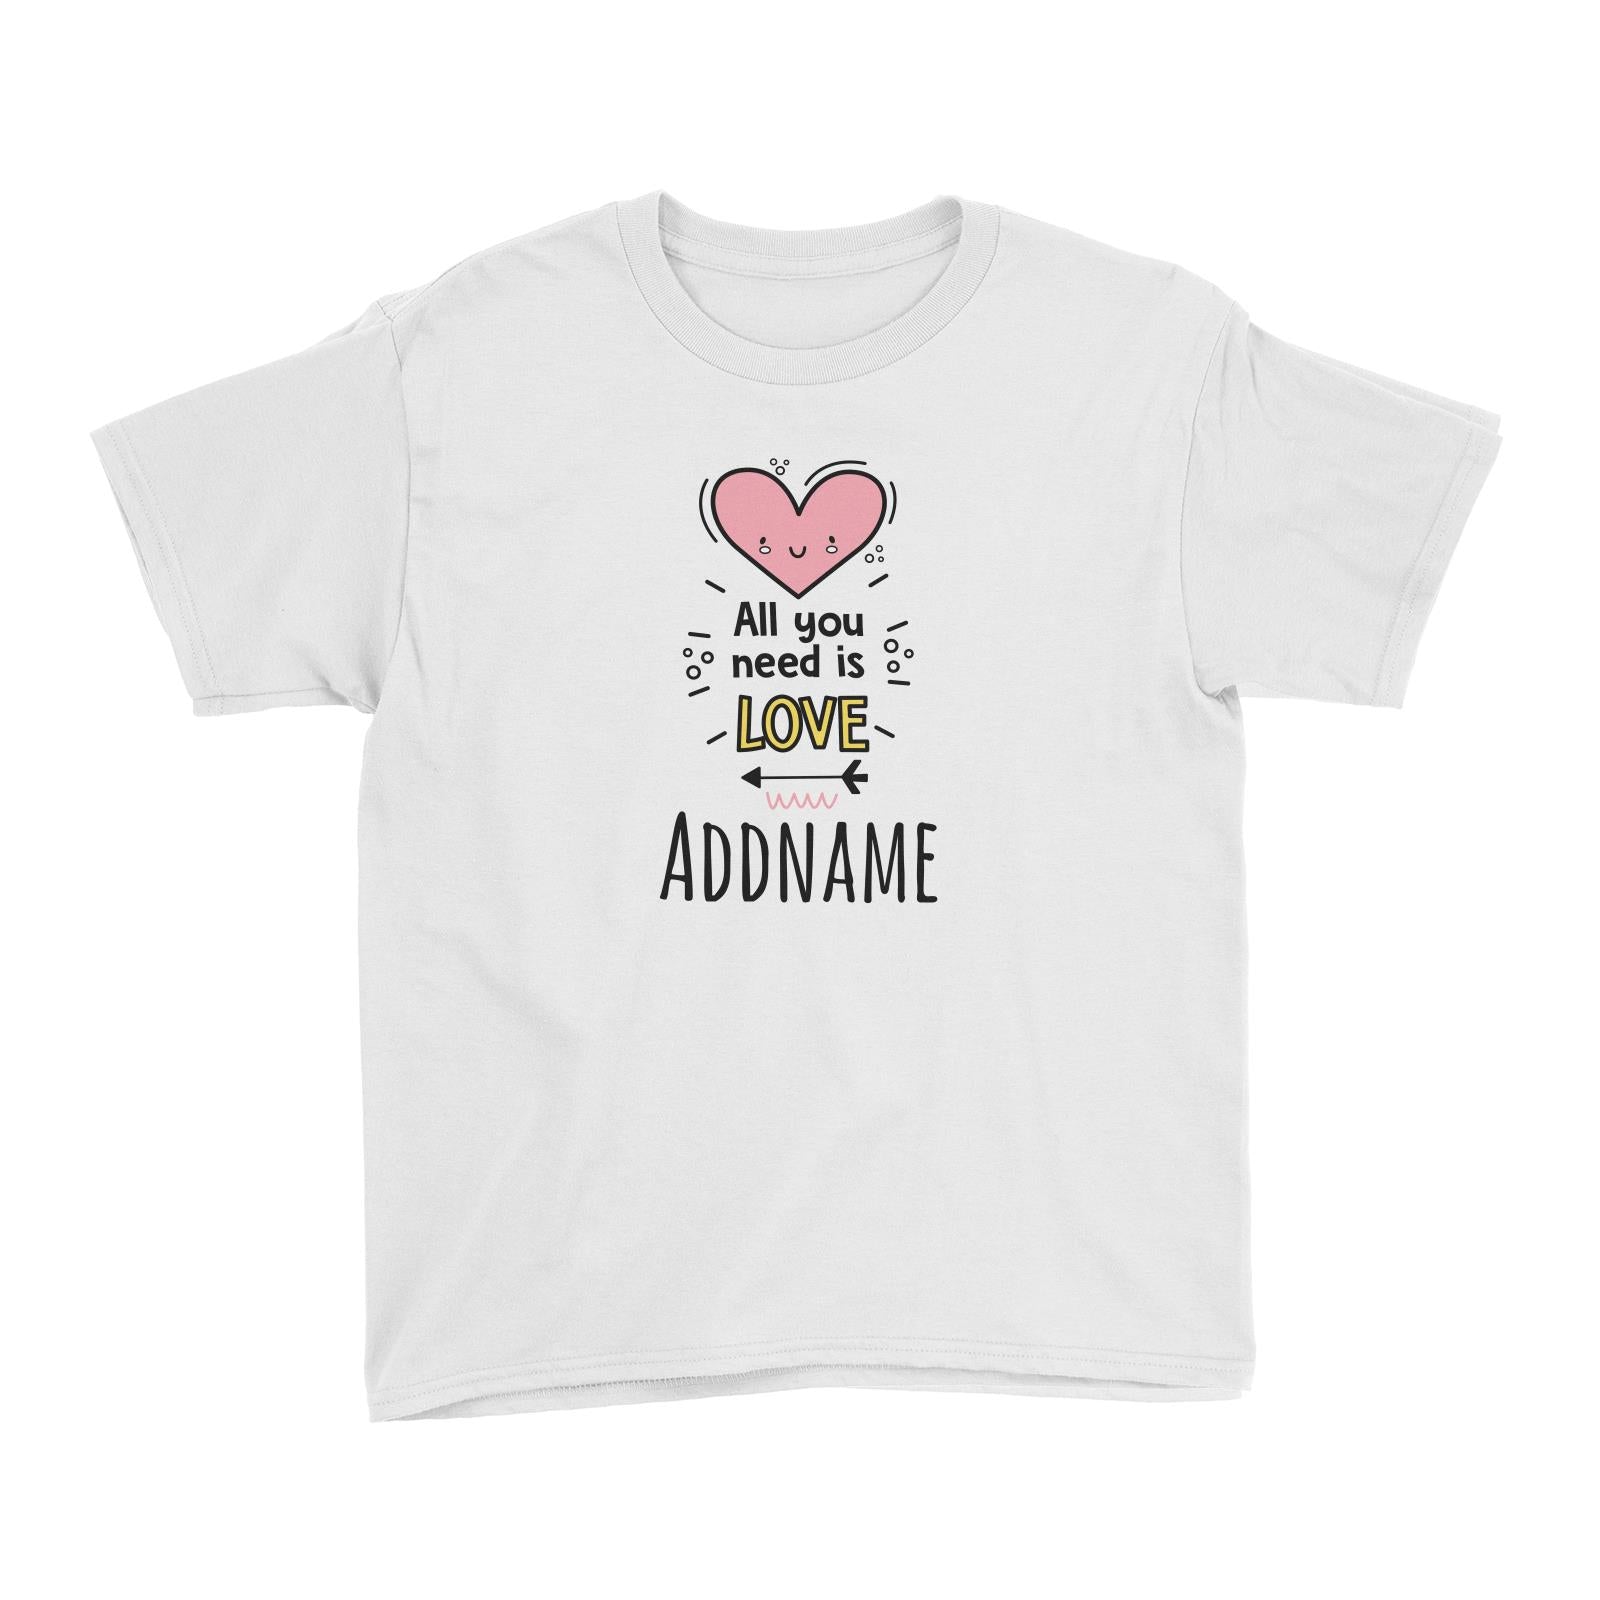 Drawn Baby Elements All You Need Is Love Addname Kid's T-Shirt